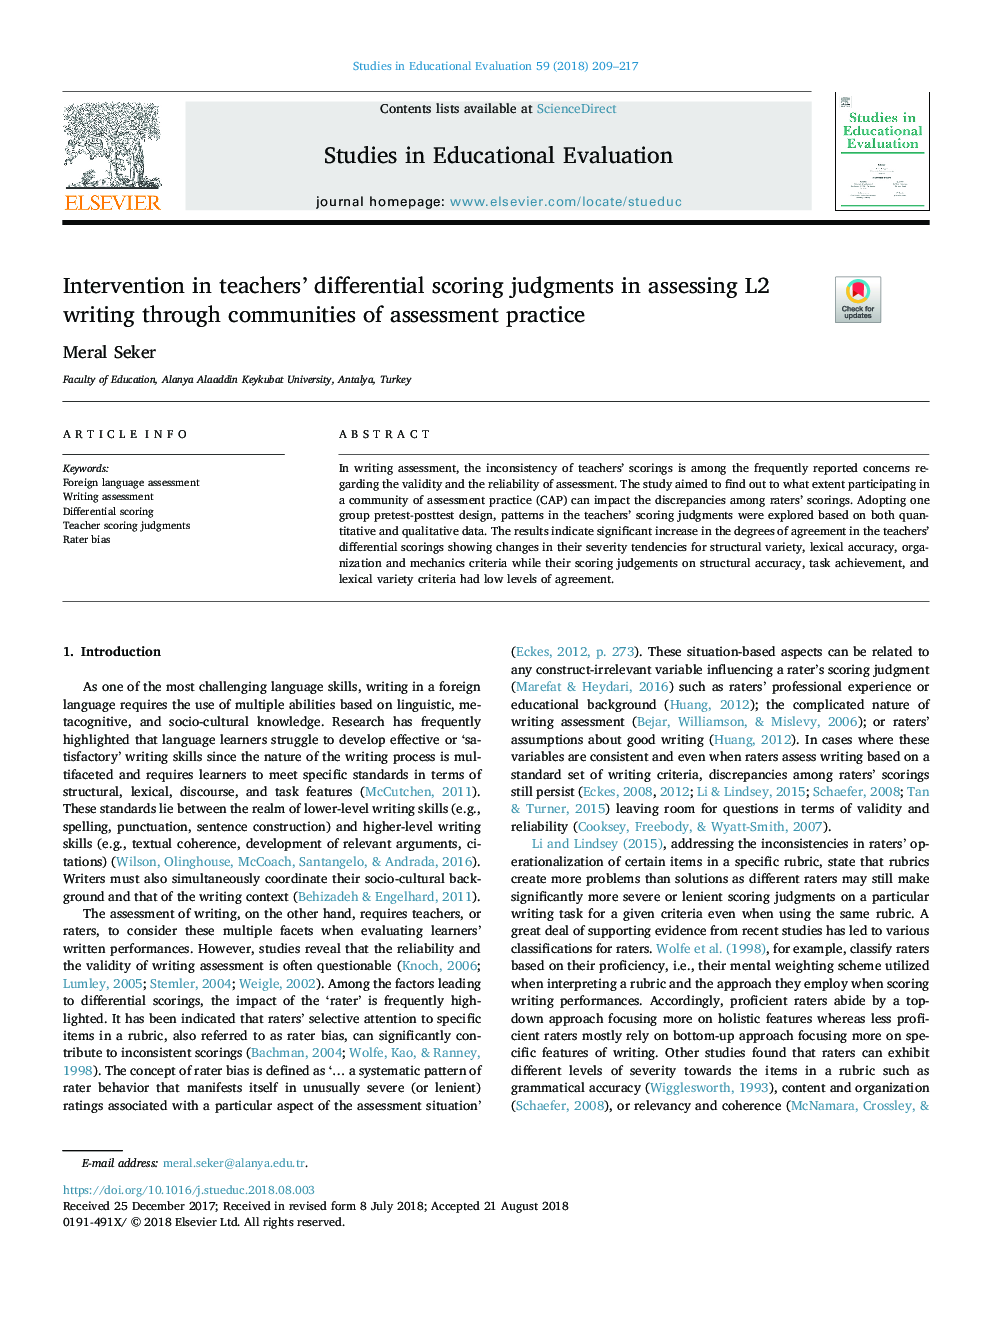 Intervention in teachers' differential scoring judgments in assessing L2 writing through communities of assessment practice